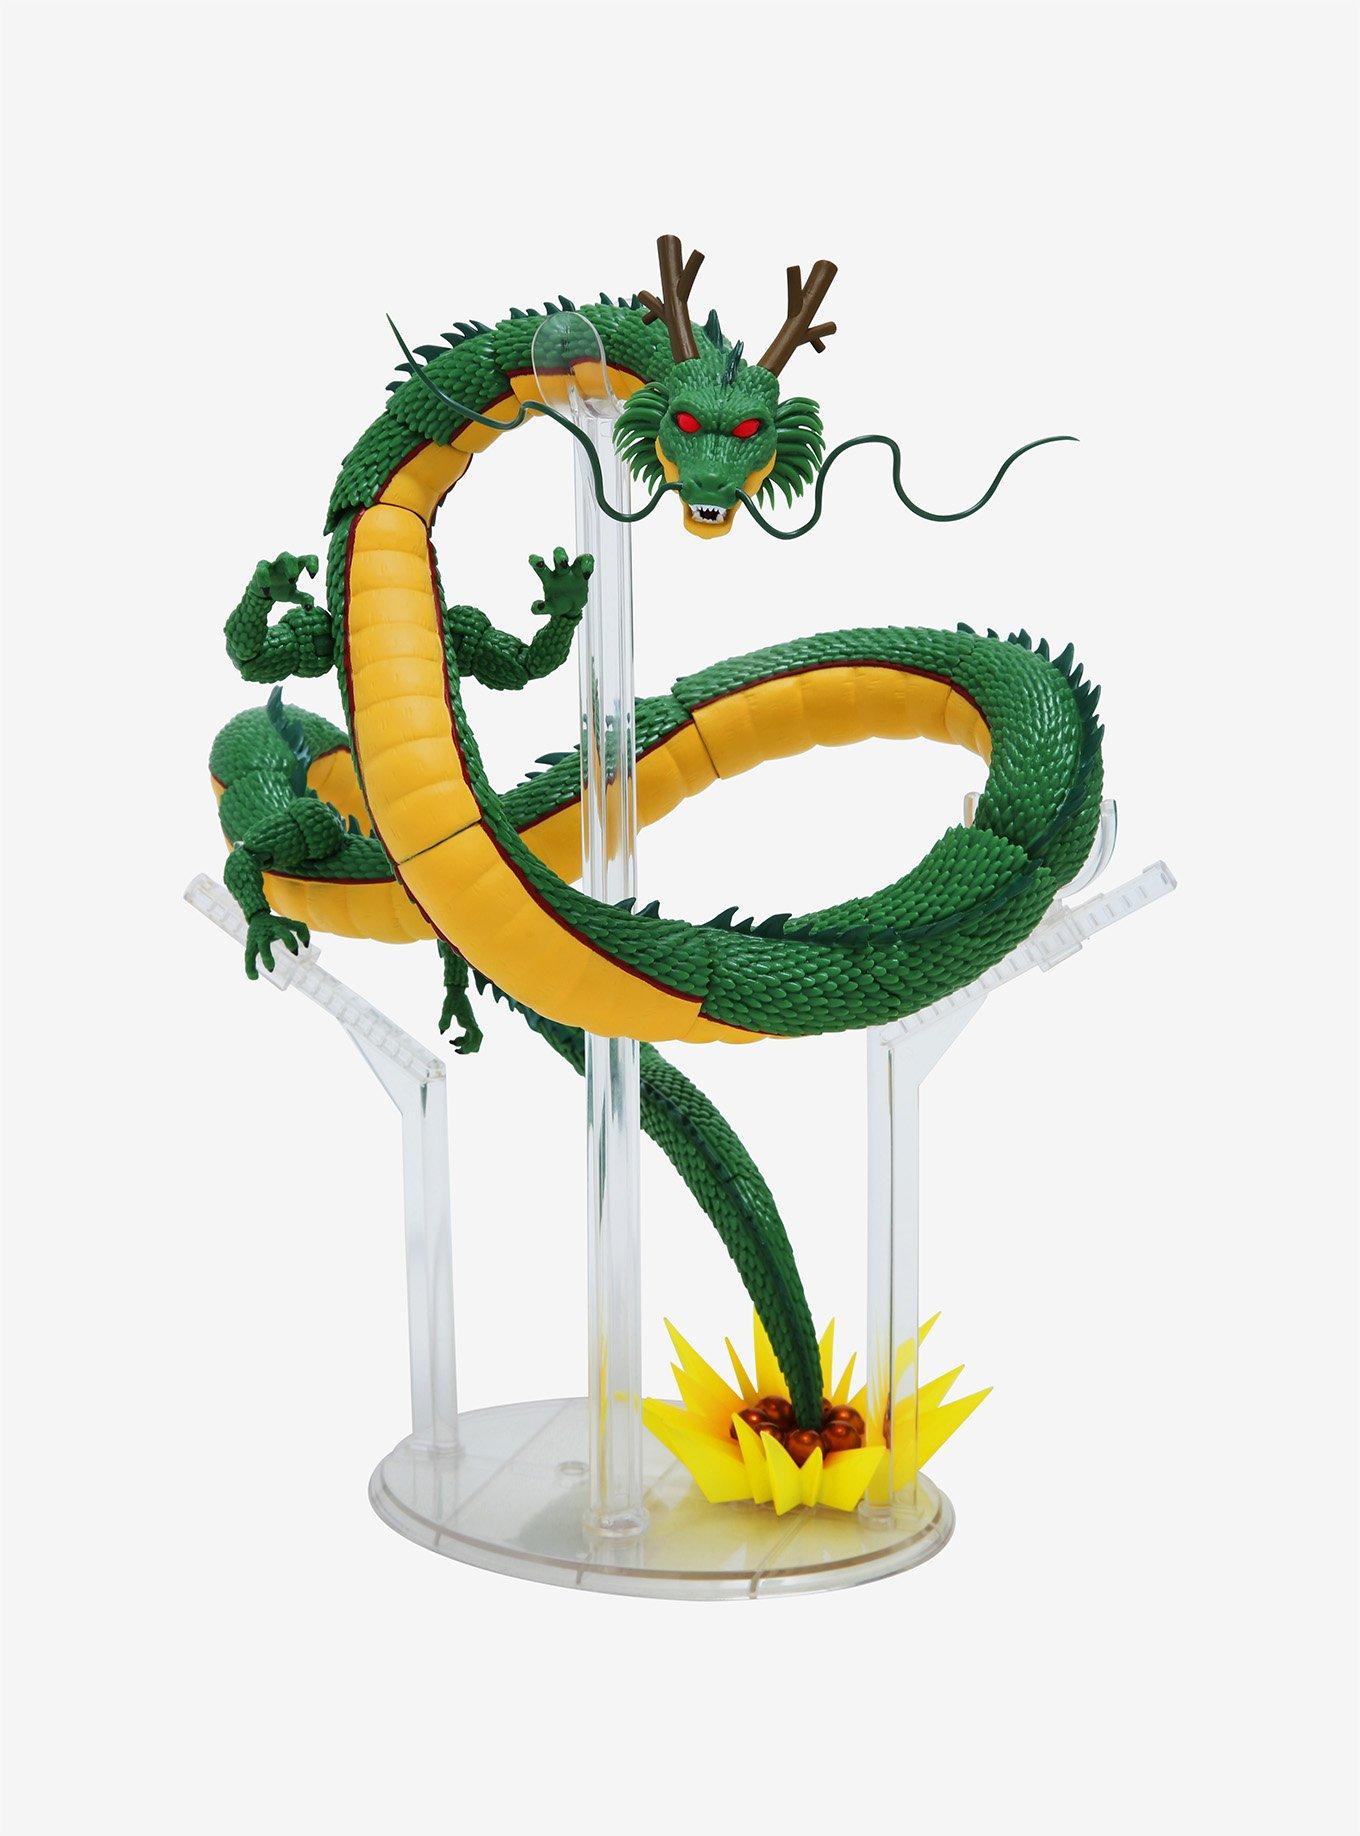 Officially Licensed Dragon Ball Z Shenron SH Figuarts Action Figure by Bandai 